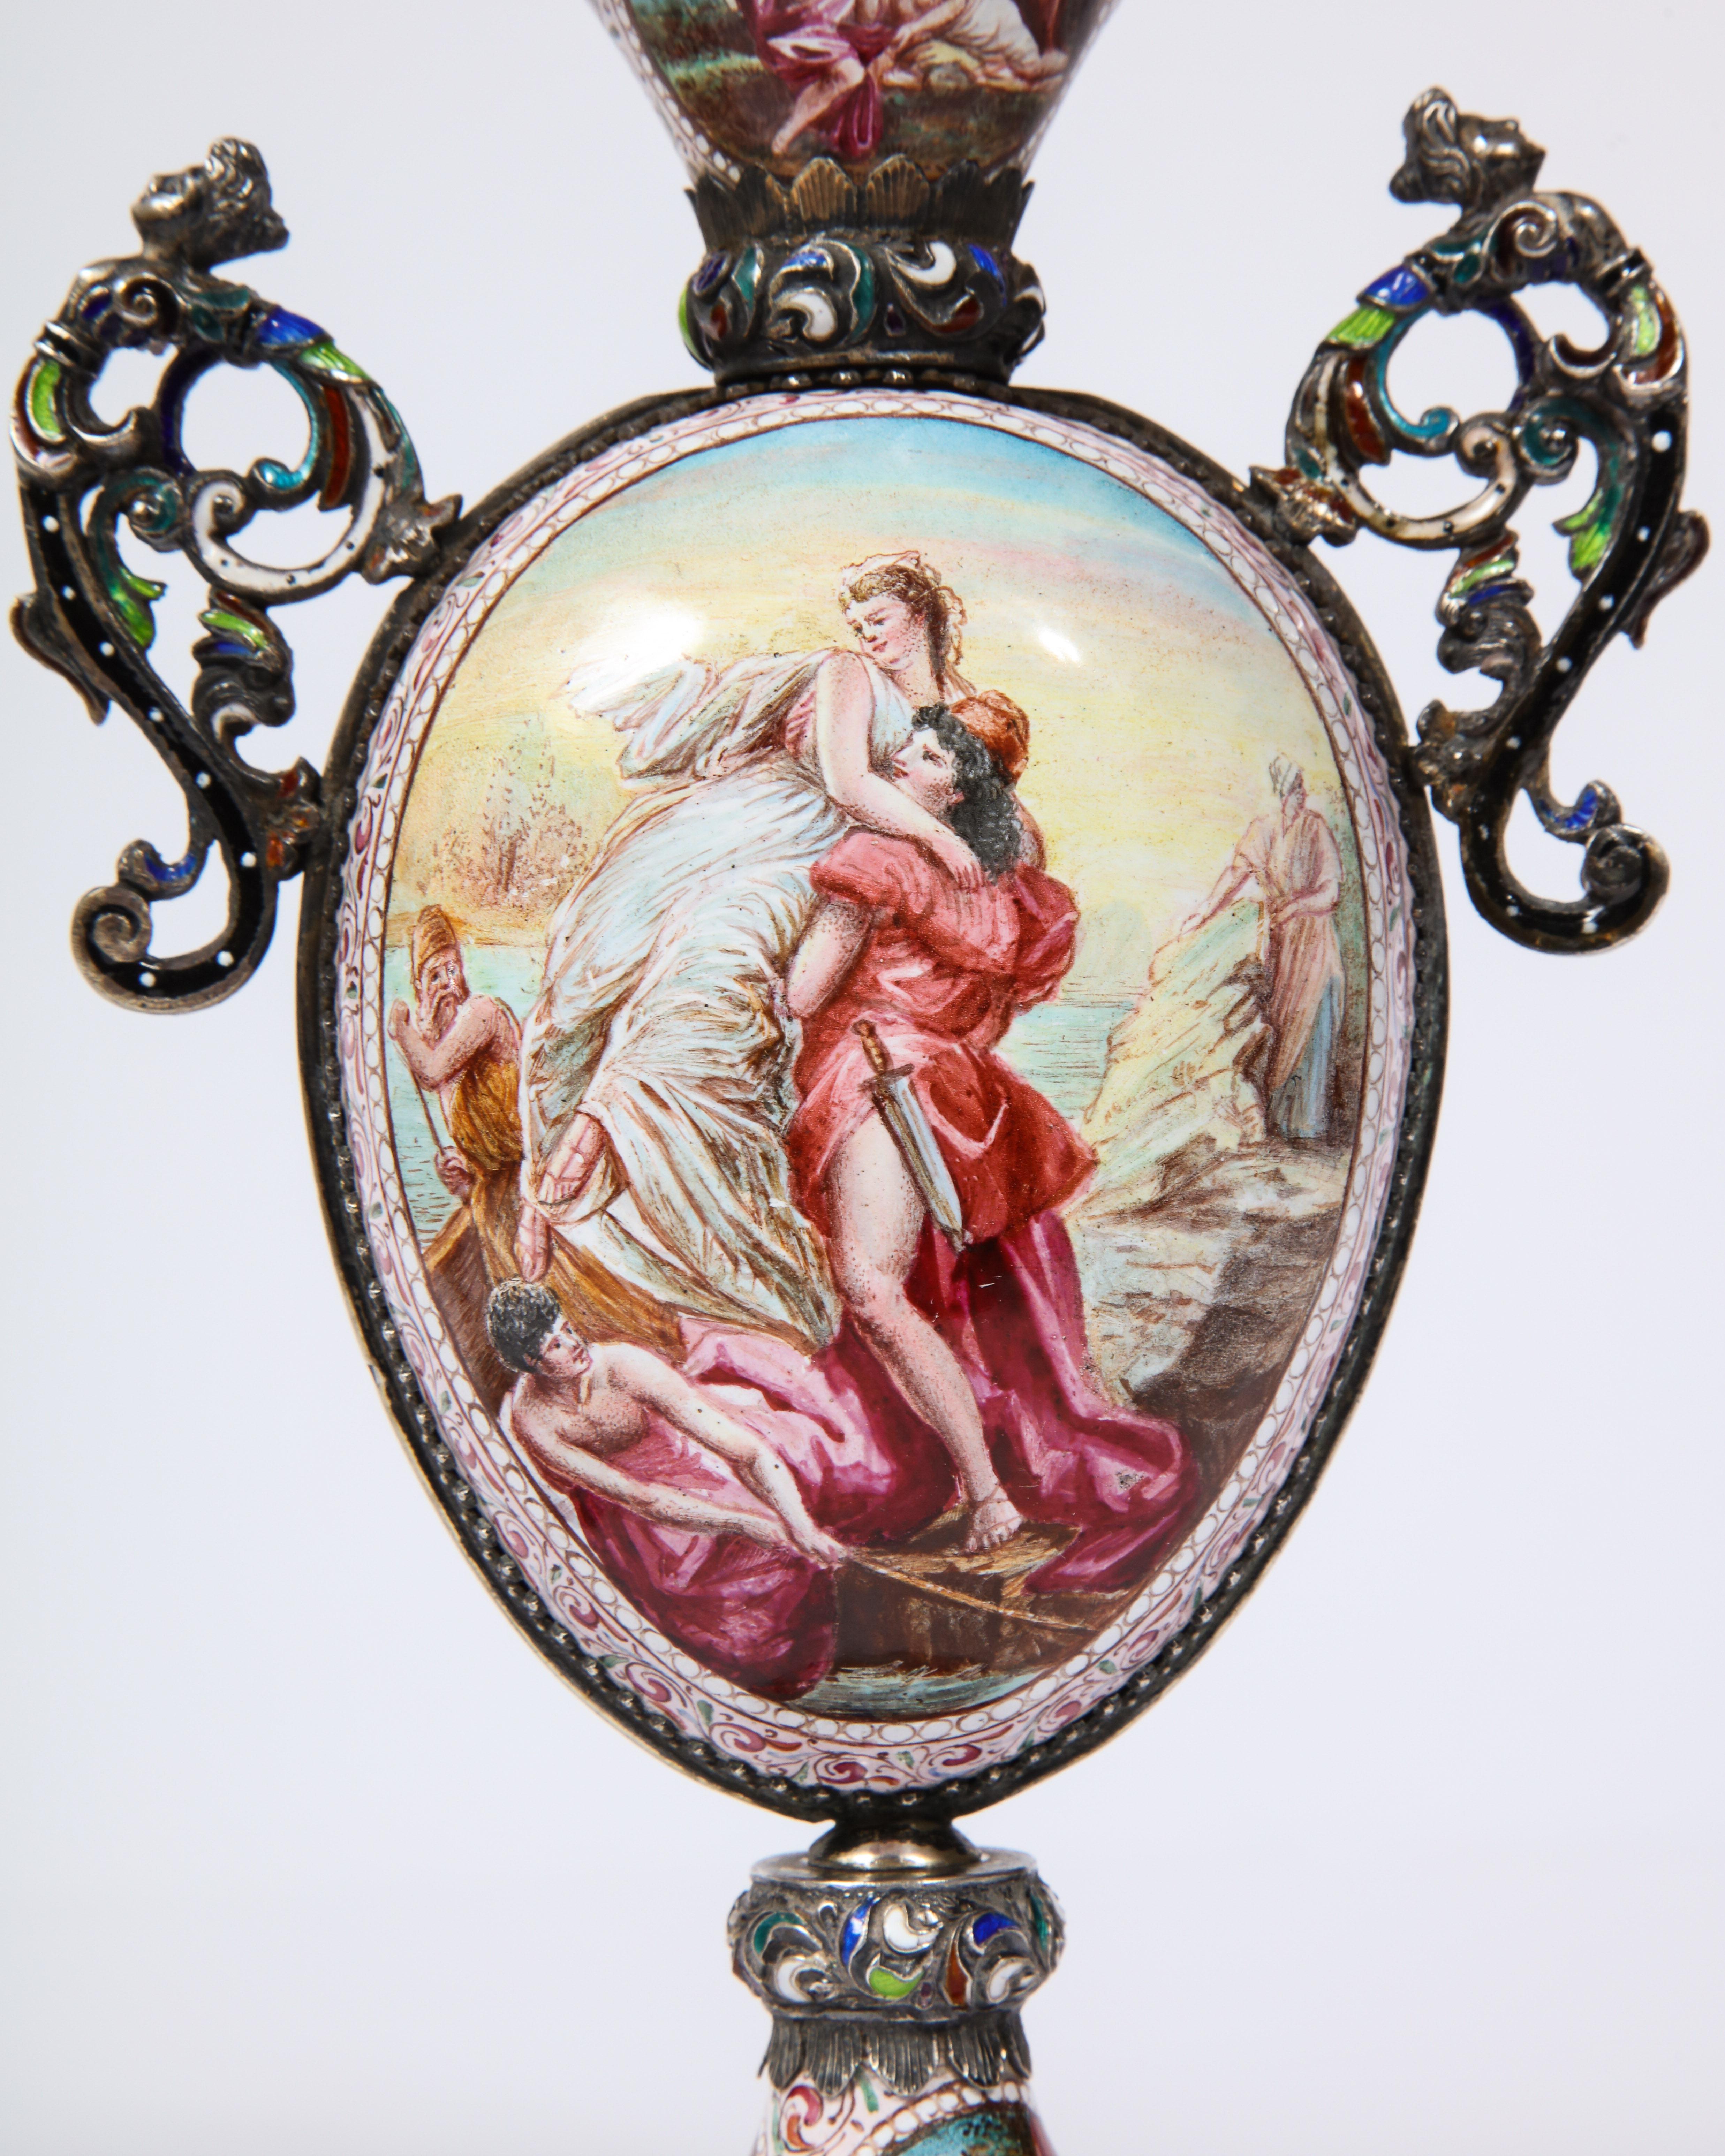 Late 19th Century Pr. Viennese Enamel on Silver Vases with Mythological Scenes Signed Hallmarks HB